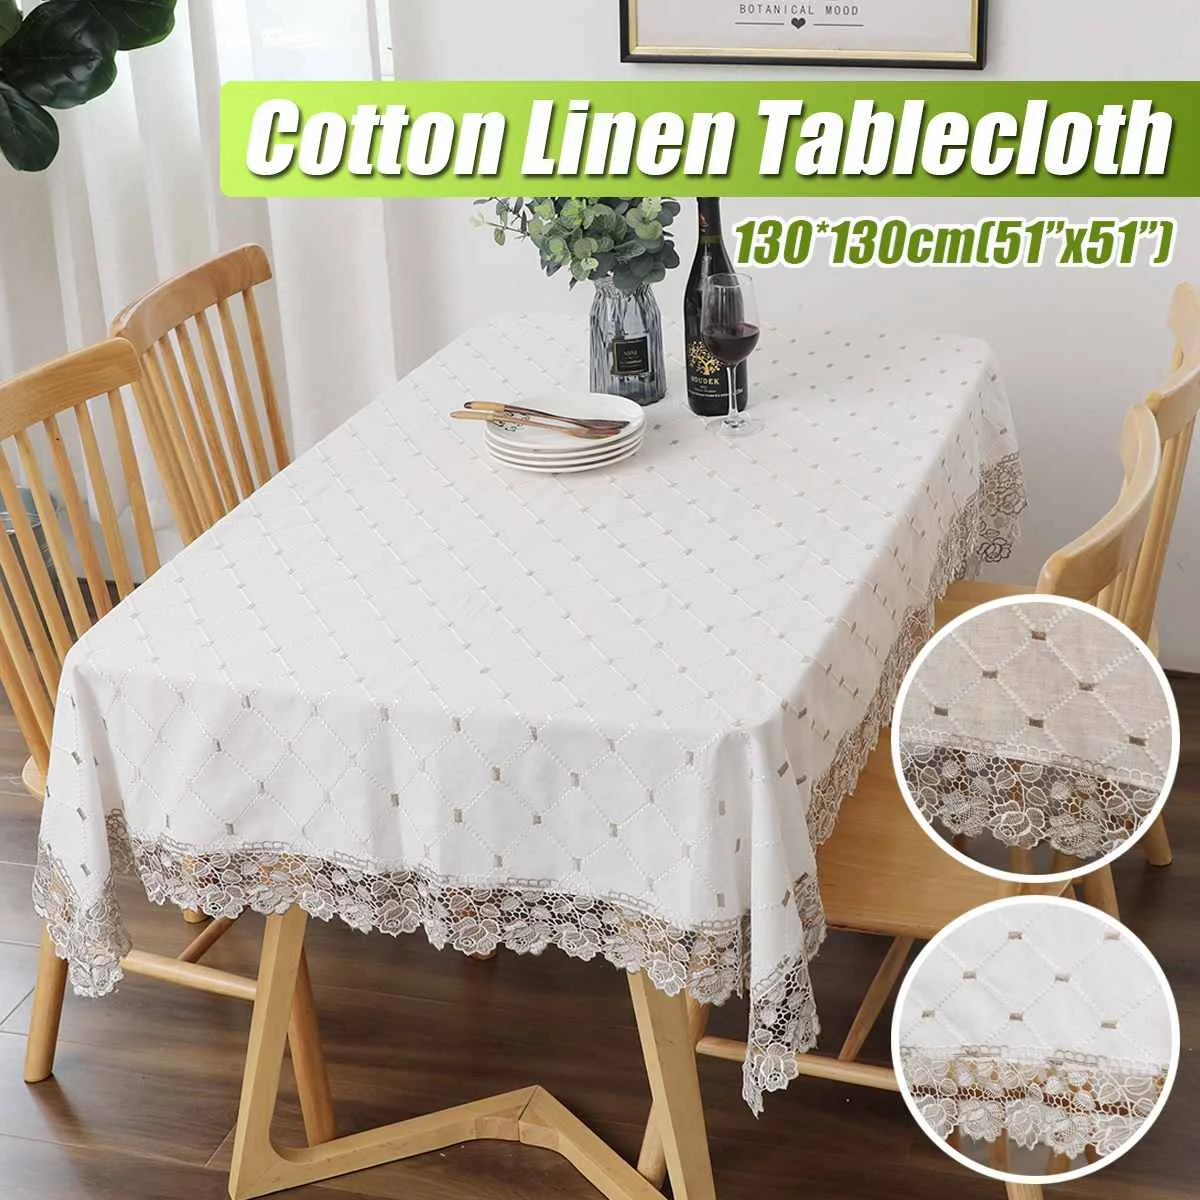 

130x130cm Square Lace Cotton Linen Tablecloth Stripes Plaid Embroidered Rectangular Dining Table Cloth Christmas Banquet Decor